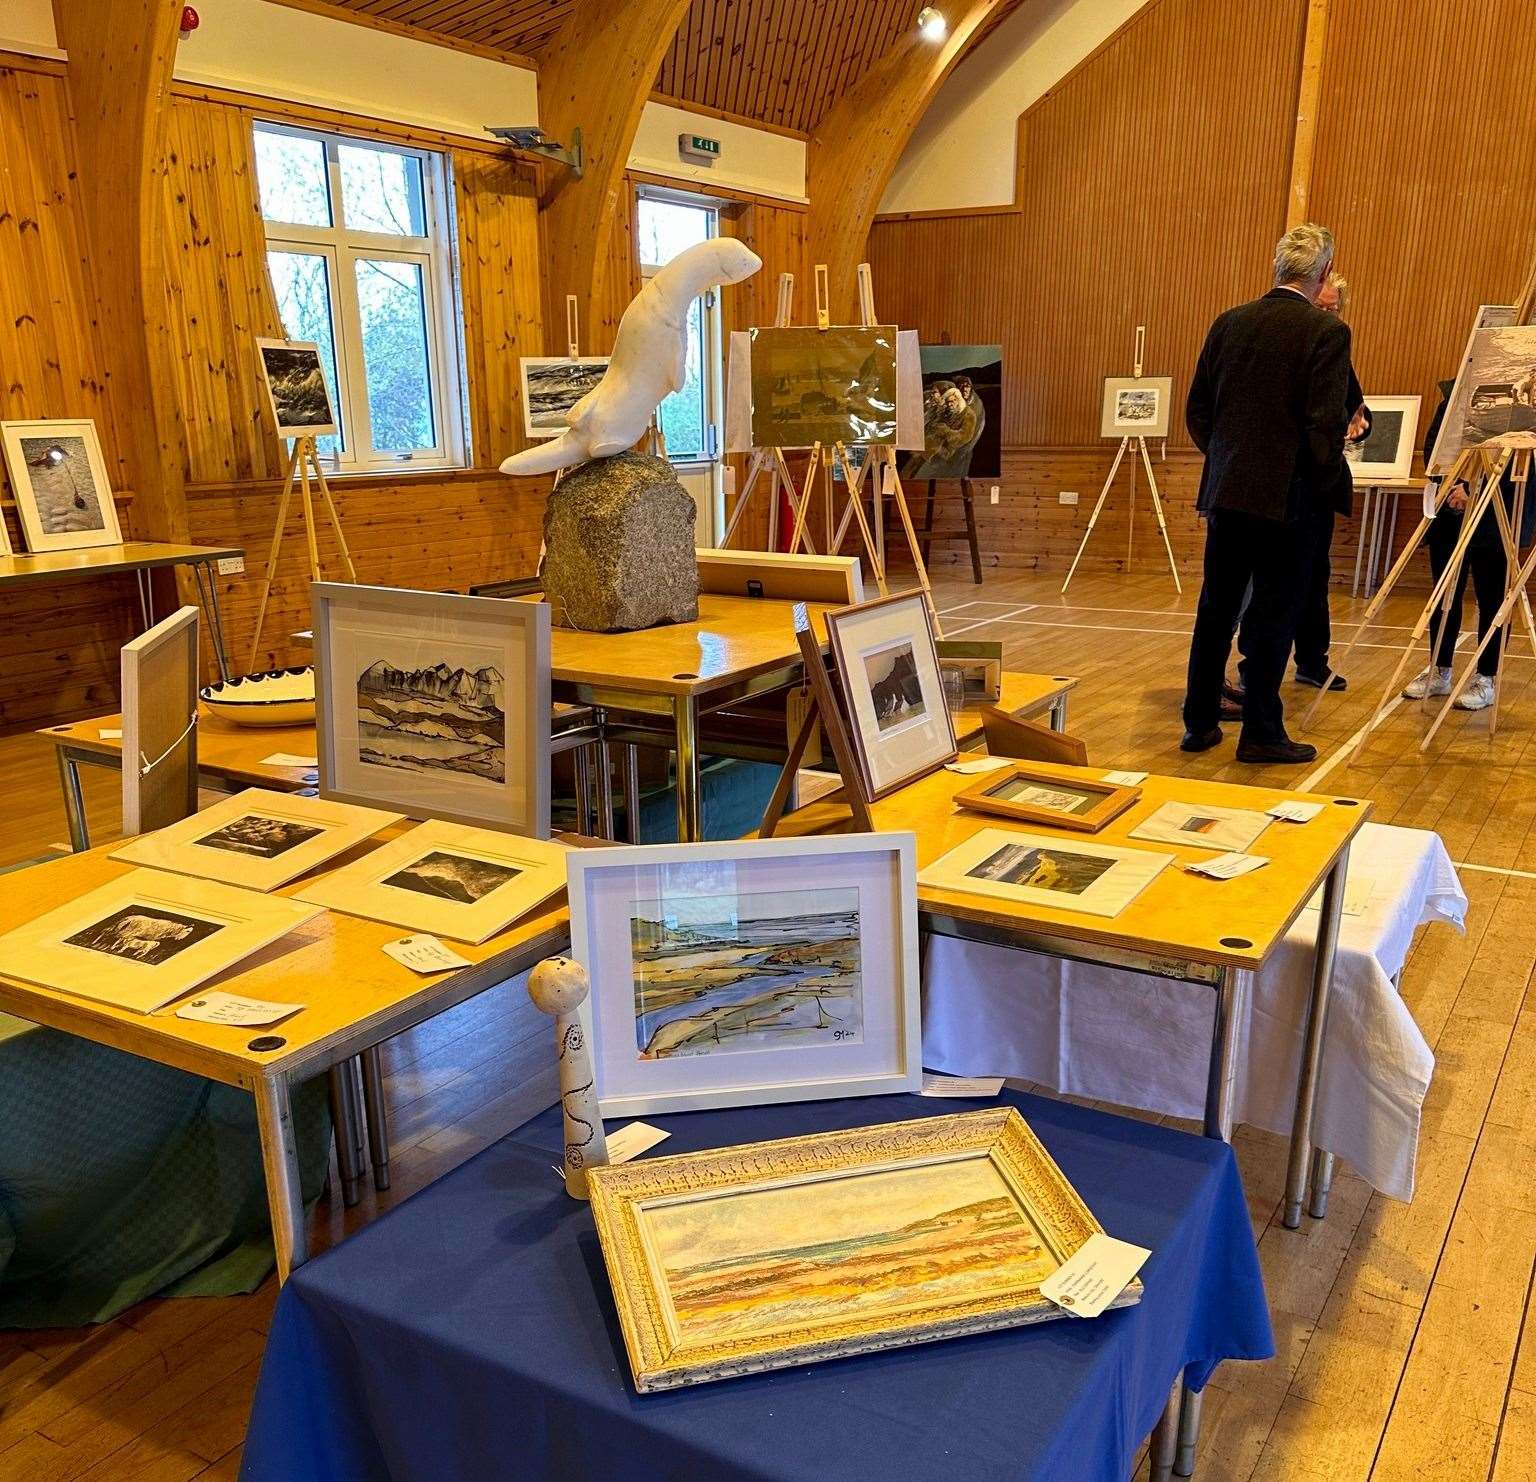 The Coigach Heritage art auction at Coigach Community Hall, to raise funds for the Lorg na Cògich project. Picture: Coigach Heritage.